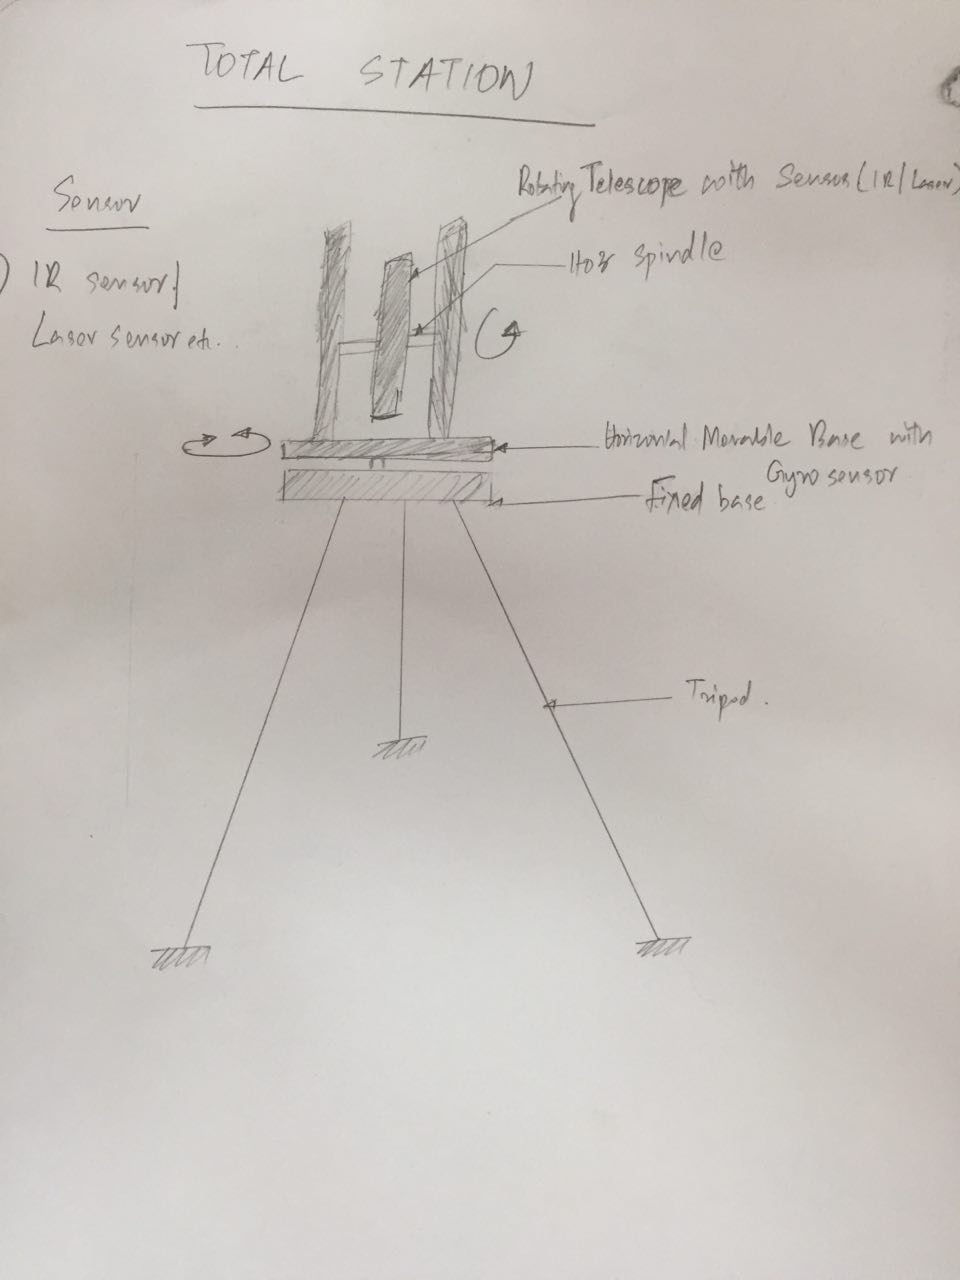 A Schematic Sketch of my Project